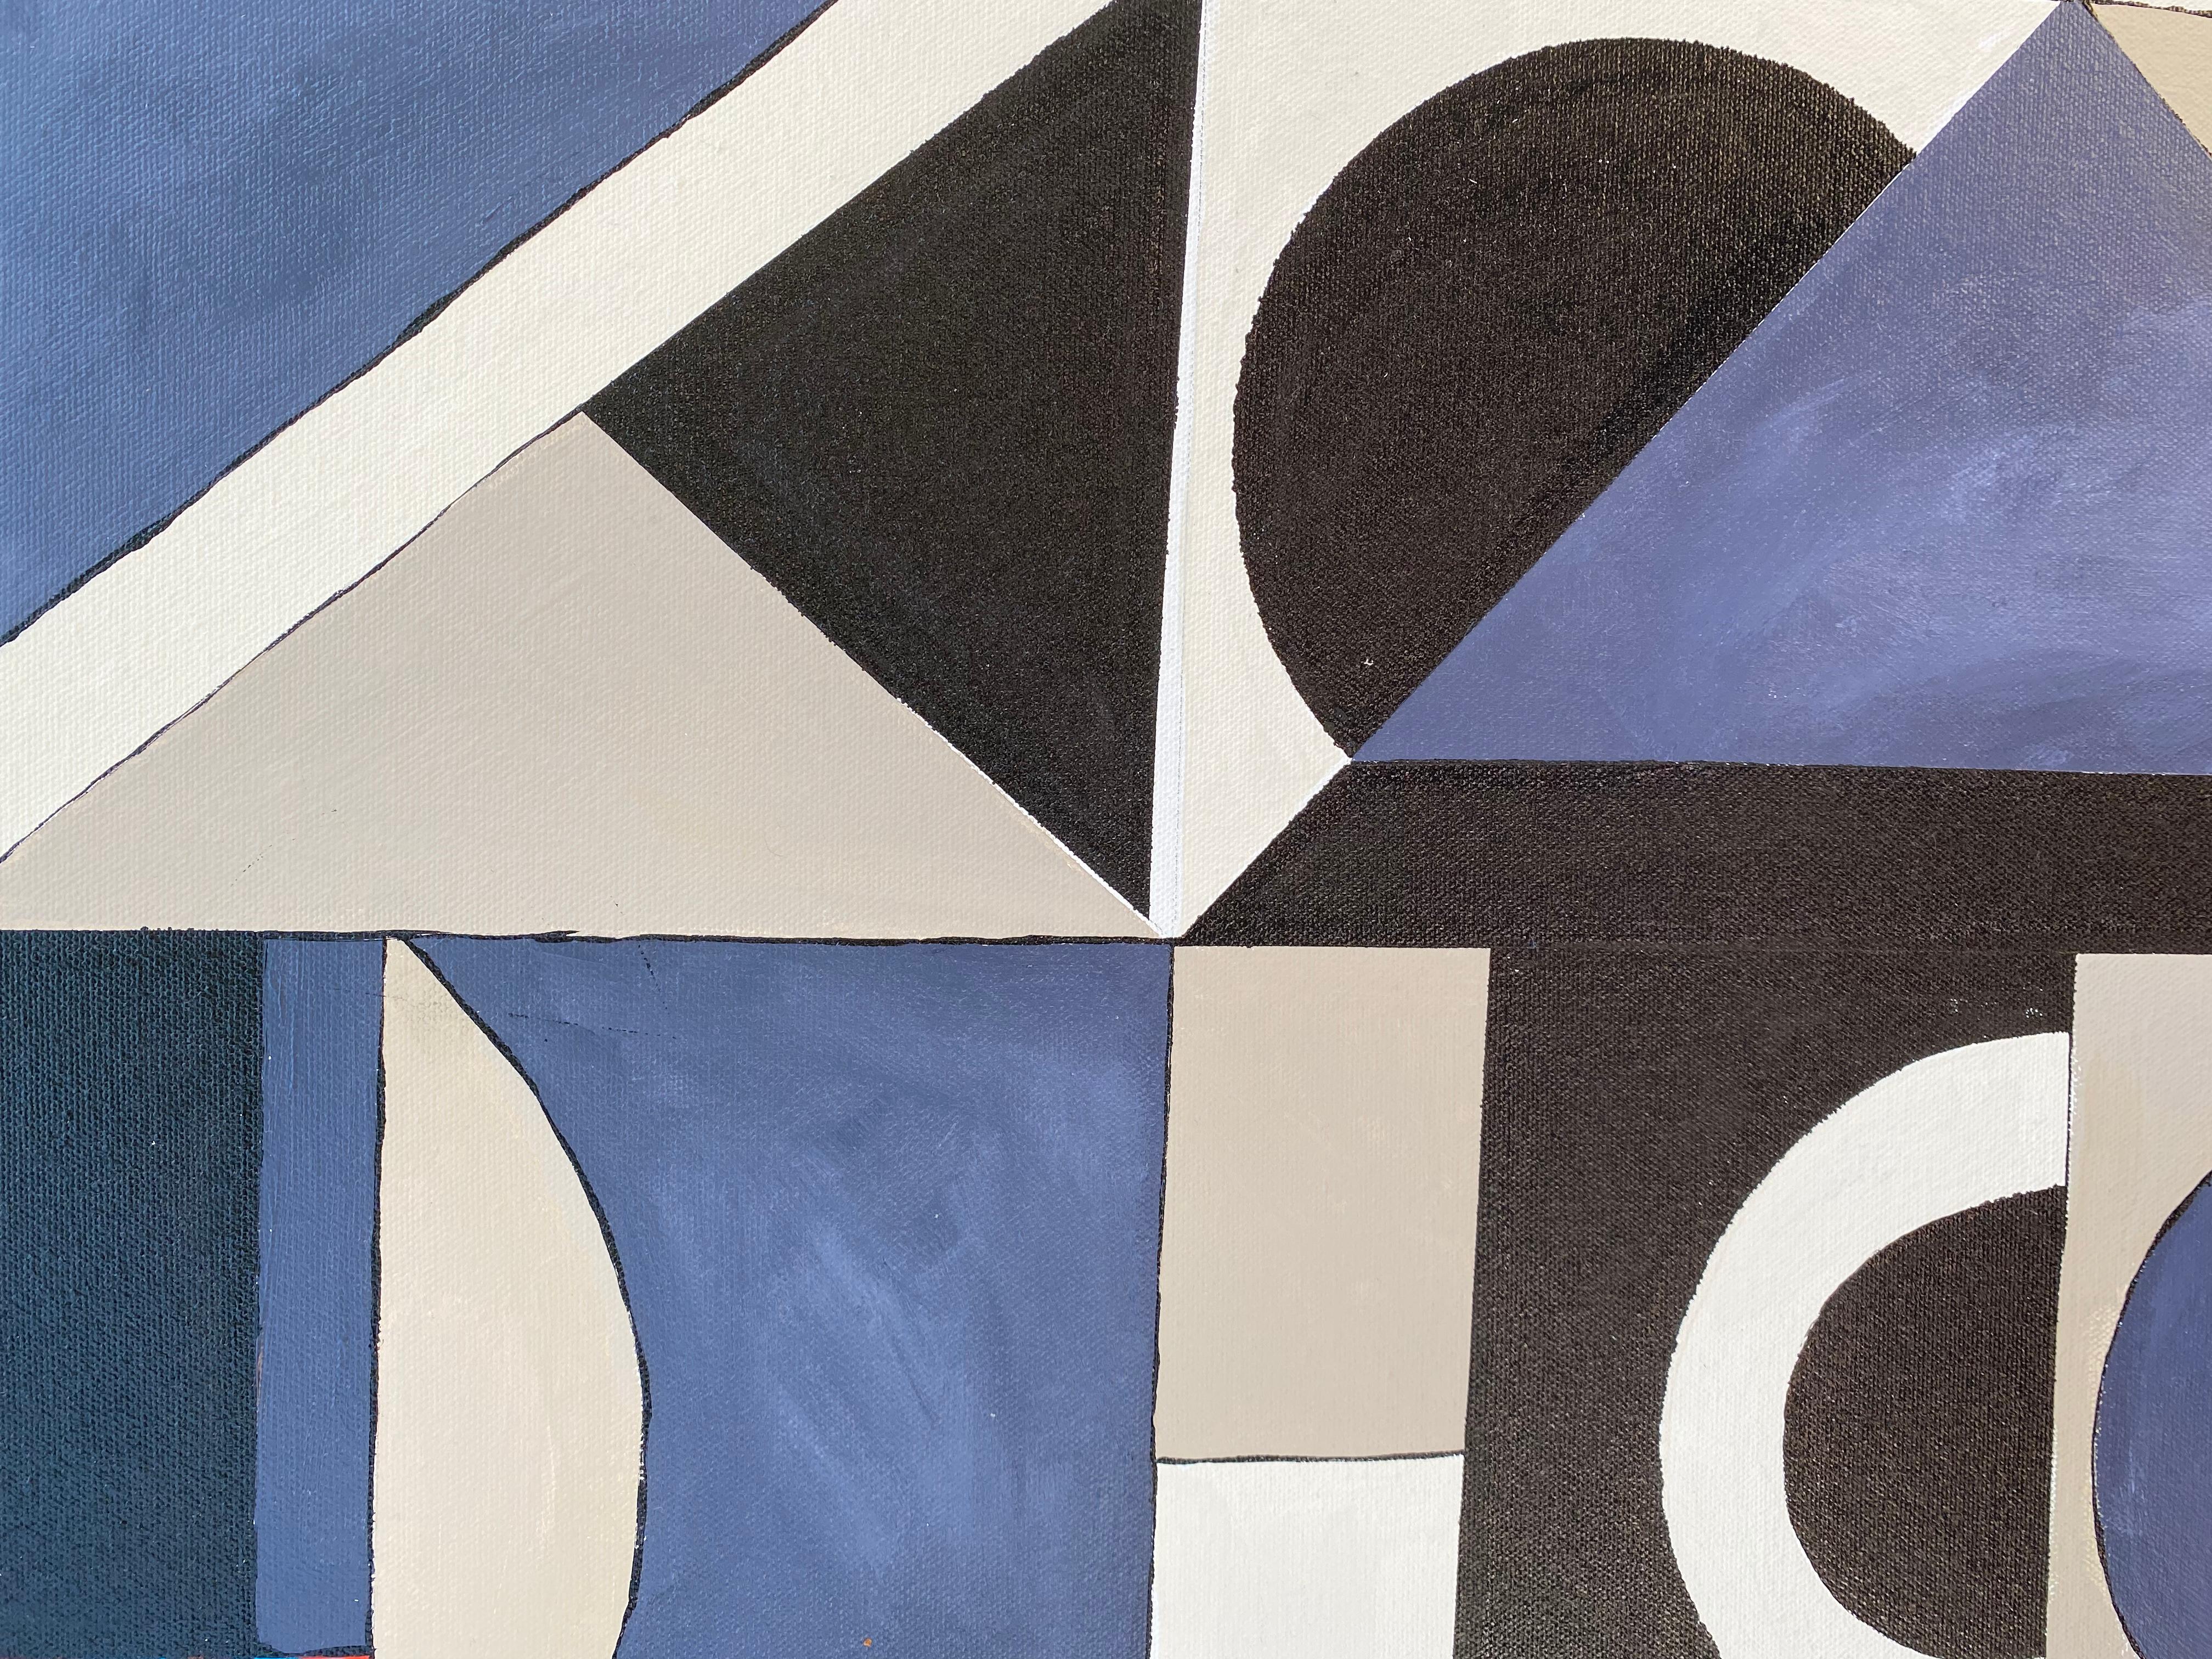 <p>Artist Comments<br />Graphic and bold, this geometric painting maps artist Alicia Dunn's mind in a flow state. Different shapes in shades of blue, beige, black, and white result in a diverse but cohesive course. 